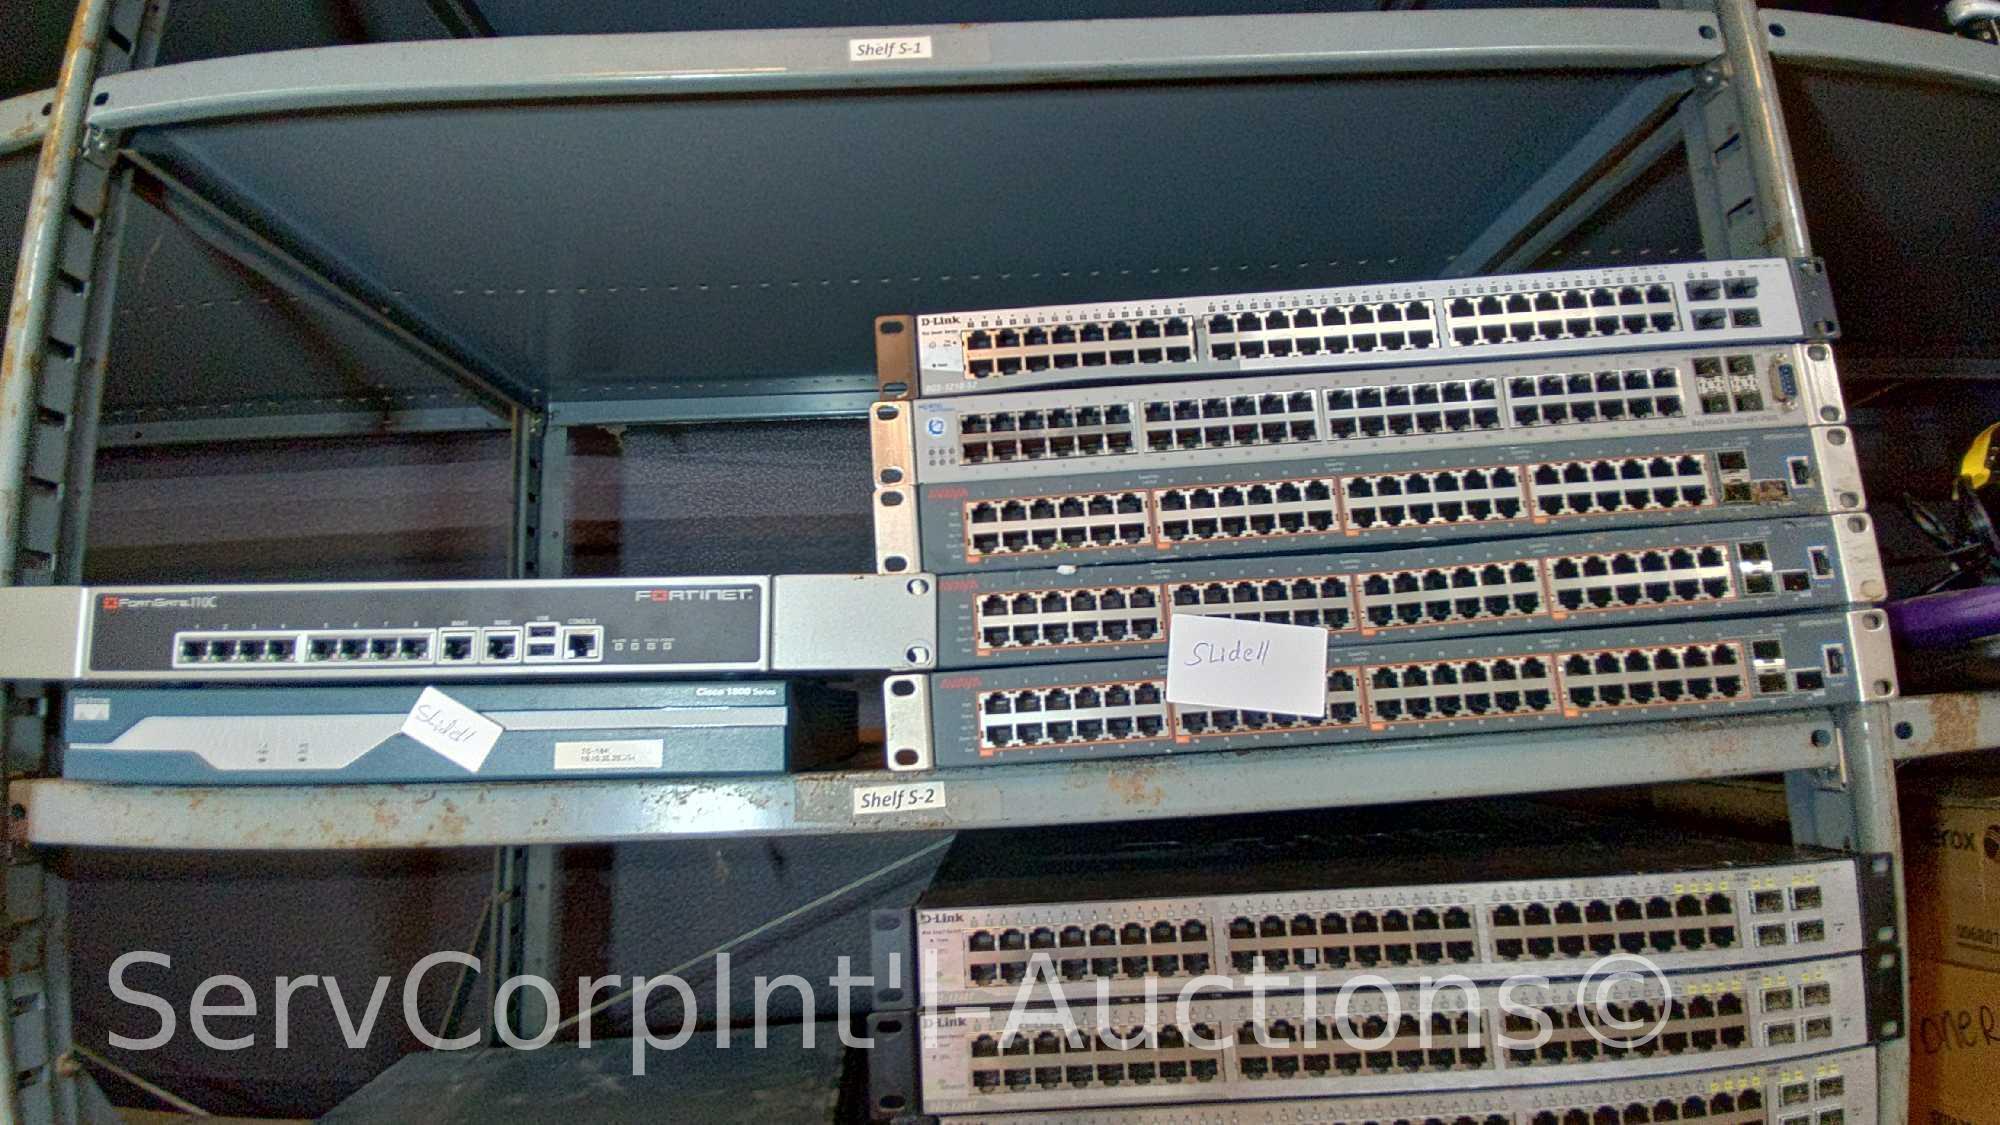 Lot on 5 Shelves of Various Network Switches: Fortinet, D-Link, Avaya, Dell Sonicwall, Nortel, 3Com